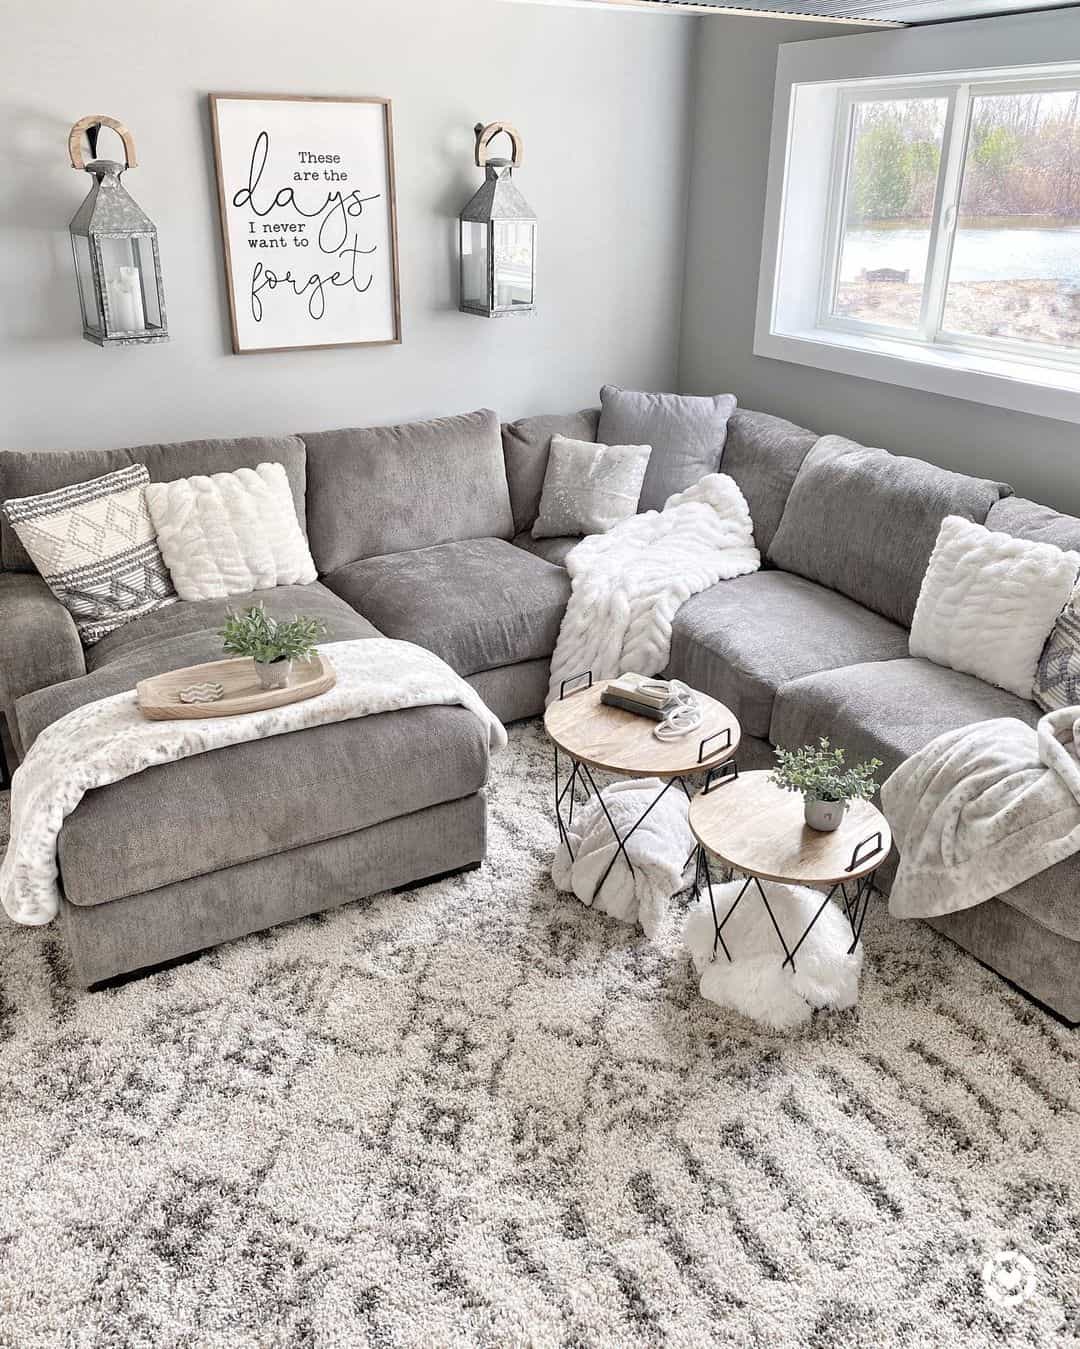 Grey Couch Living Room Ideas  Grey couch living room, Couches living room,  Grey sofa living room